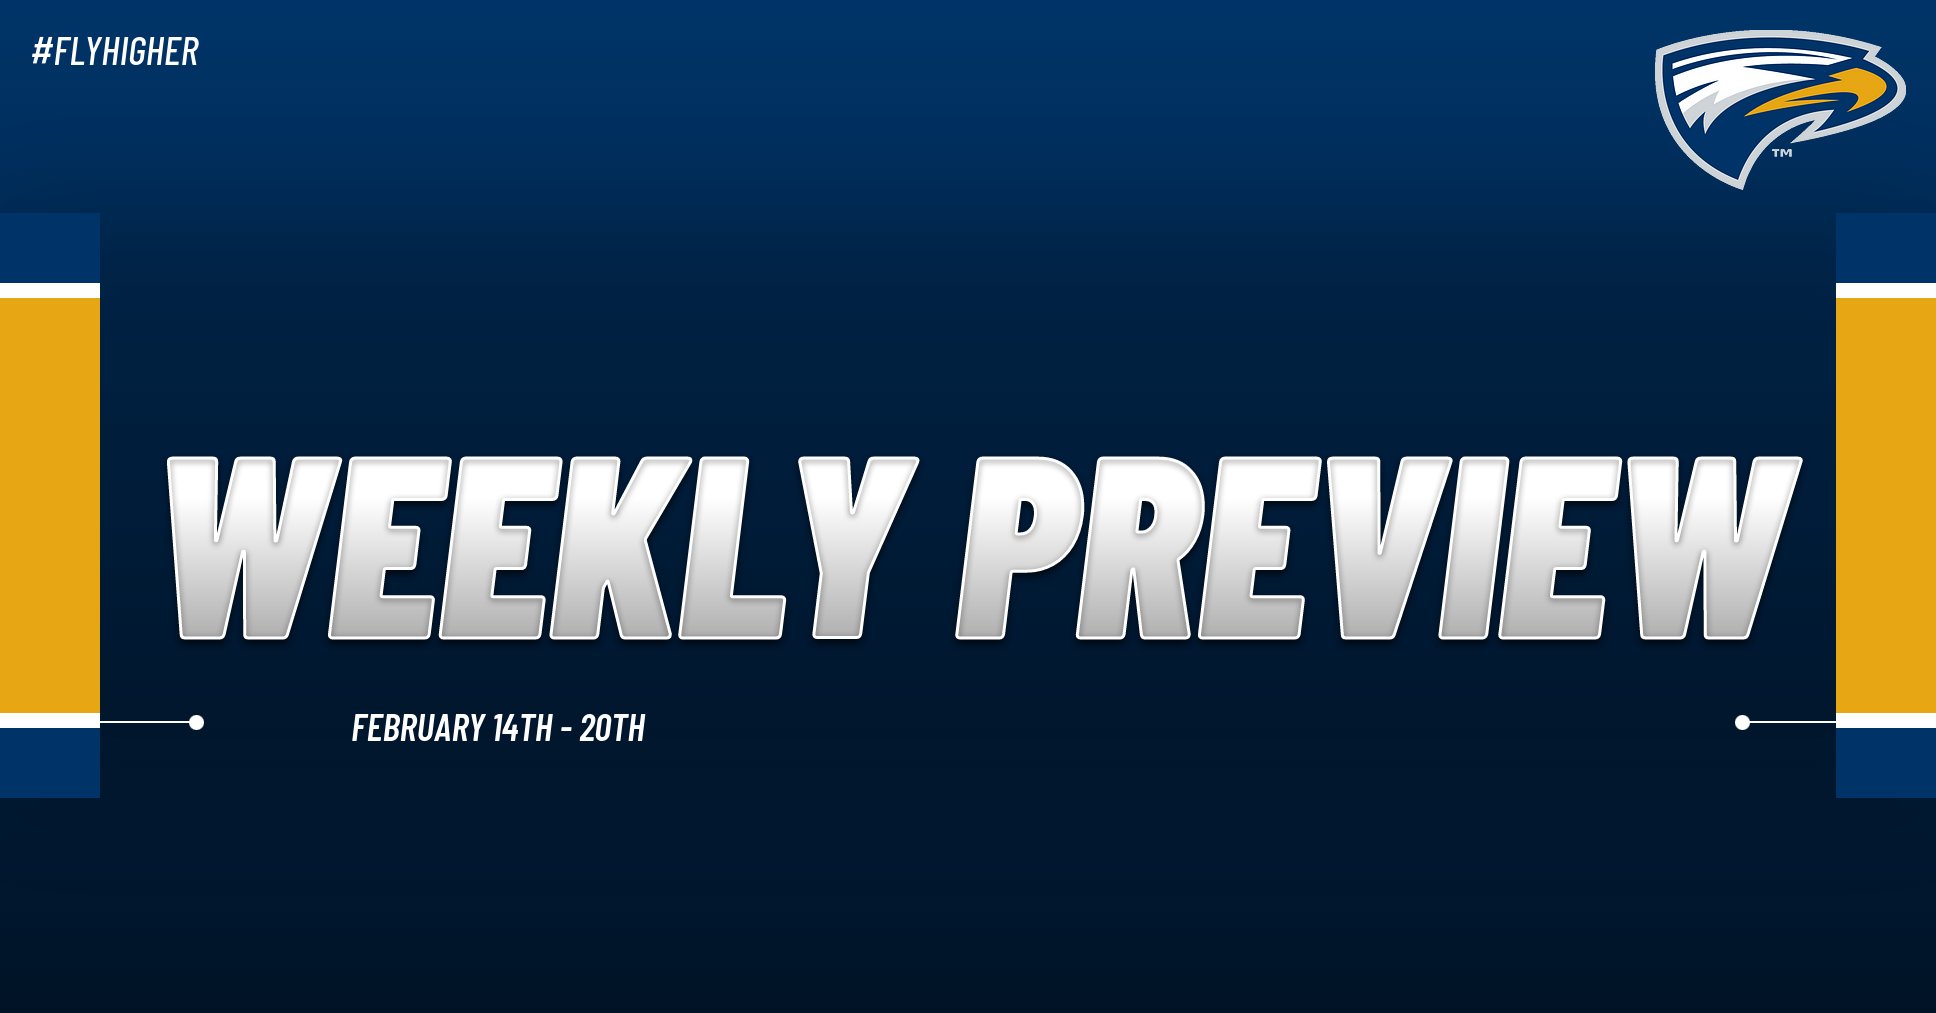 Emory Athletics Weekly Preview - February 14th - 20th